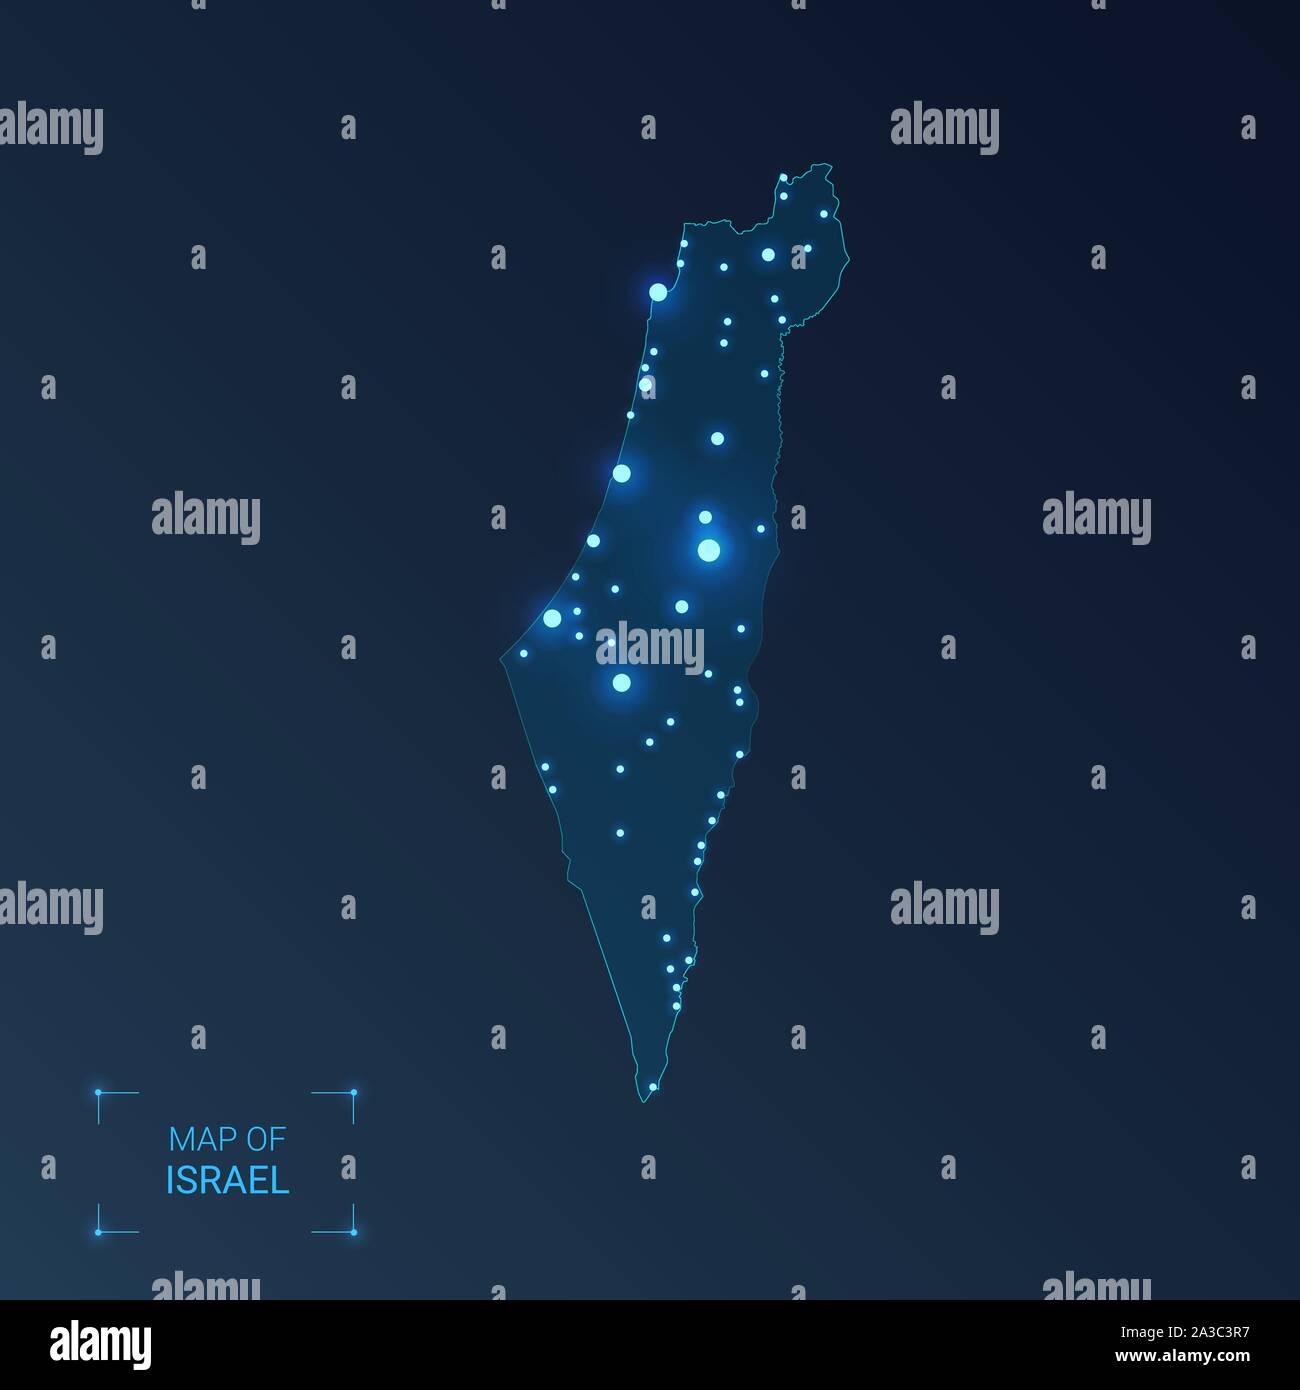 Israel map with cities. Luminous dots - neon lights on dark background ...